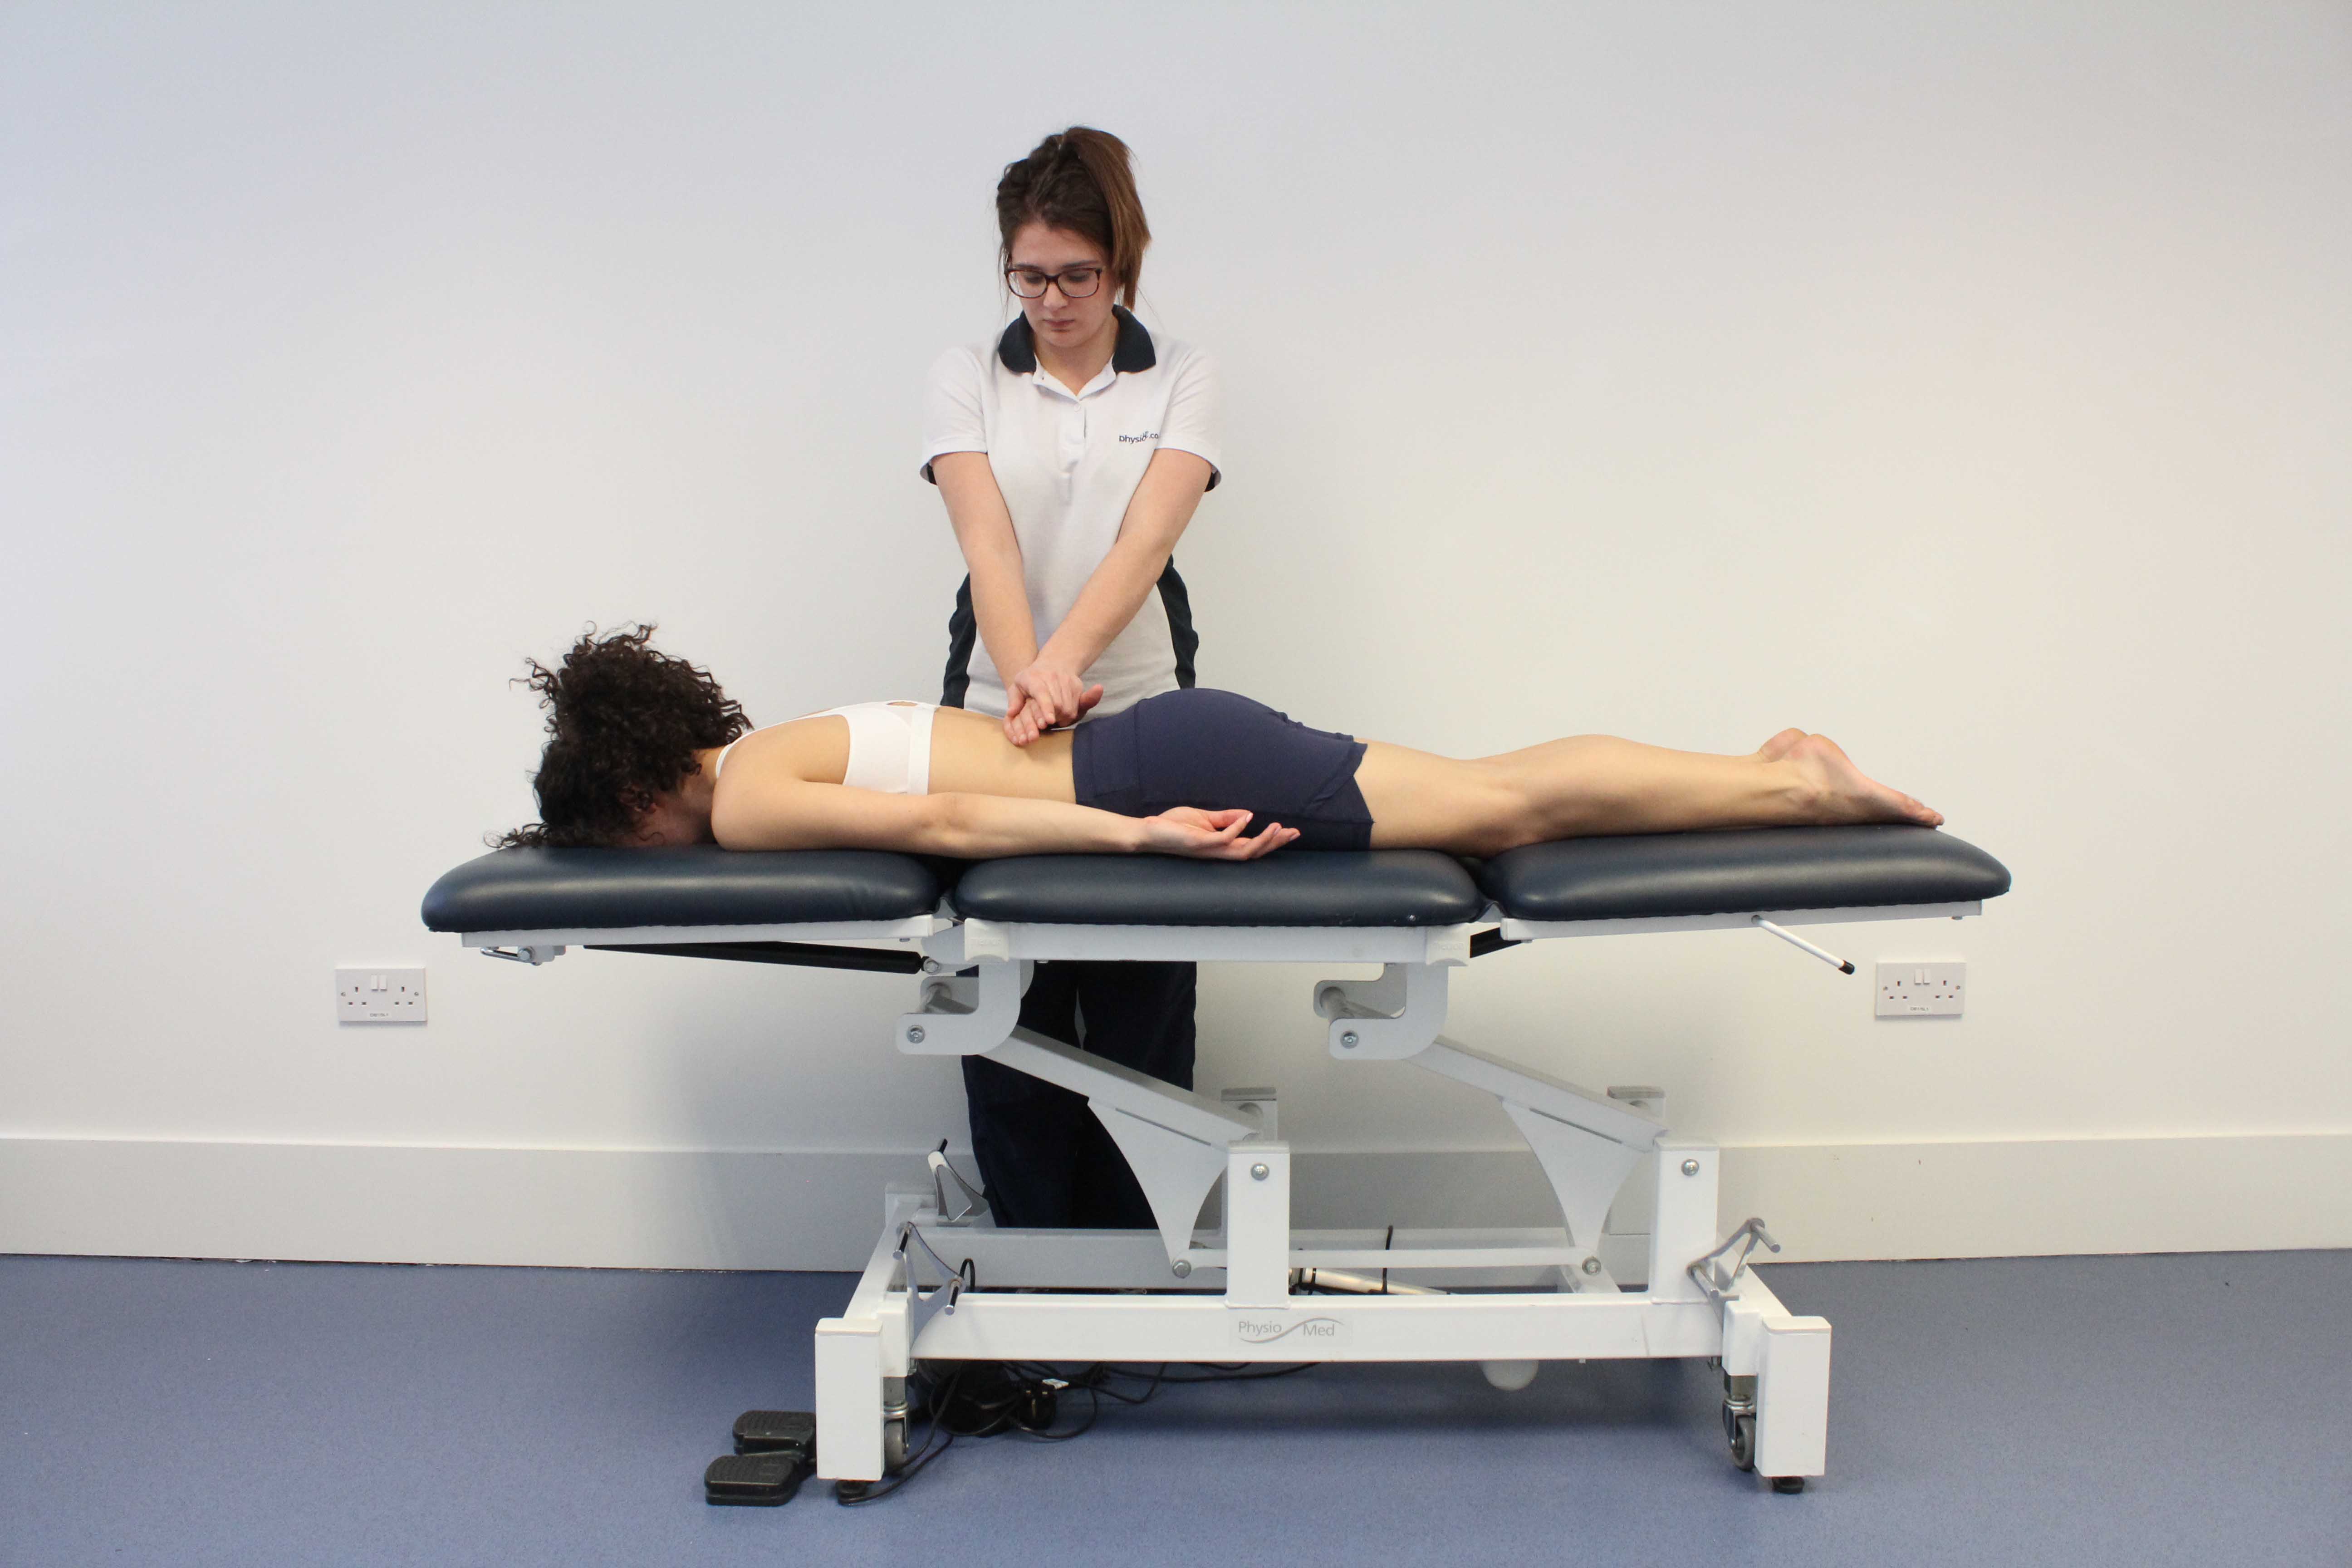 Lumbar spine mobilisations to relieve pain and stiffness perfomed by a musculoskeletal physiotherapist